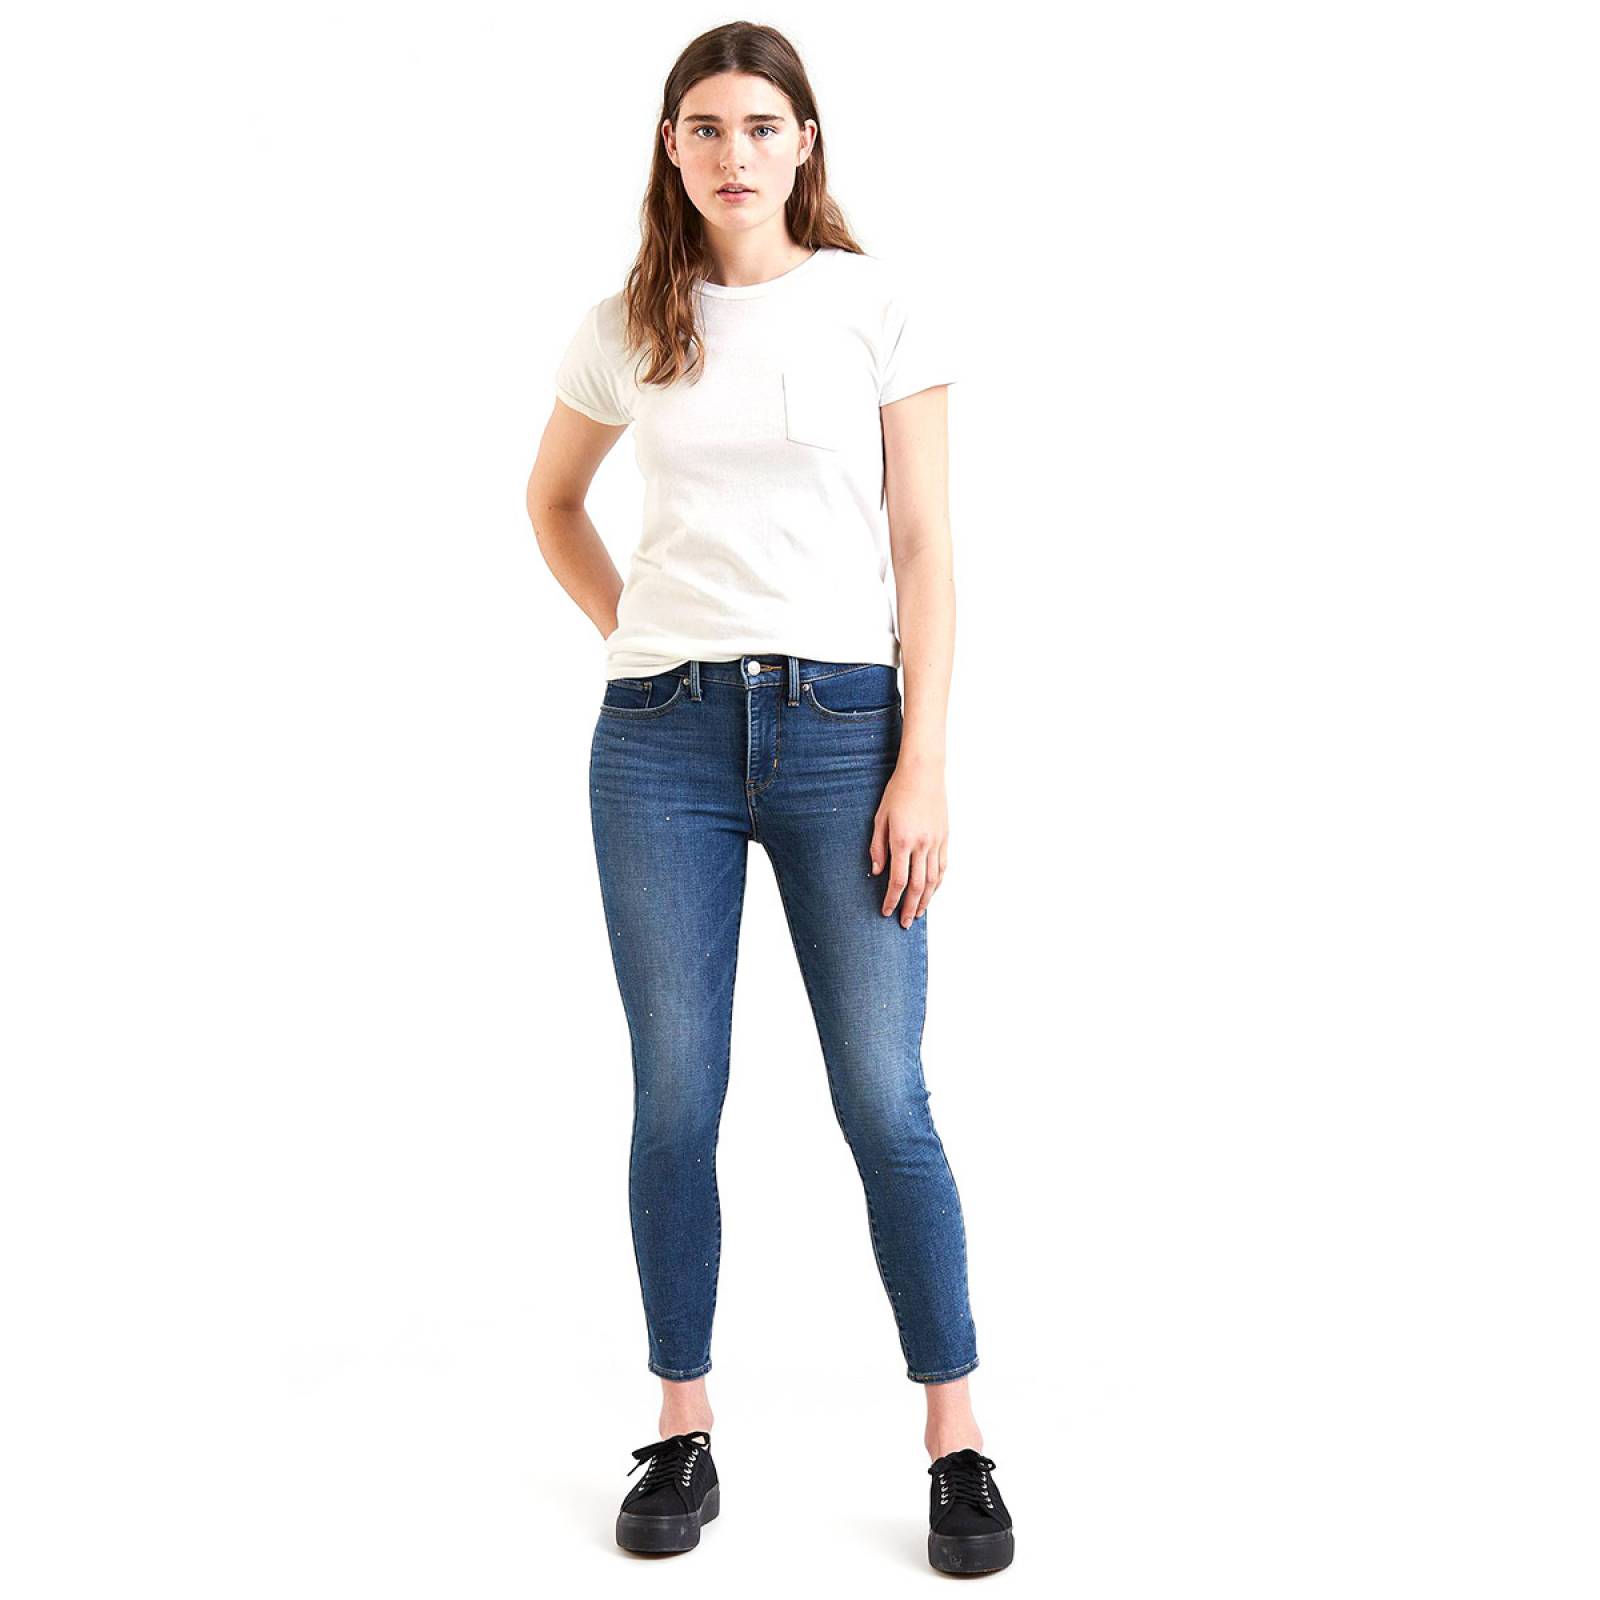 Jeans 311 Shaping Ankle Skinny para Dama